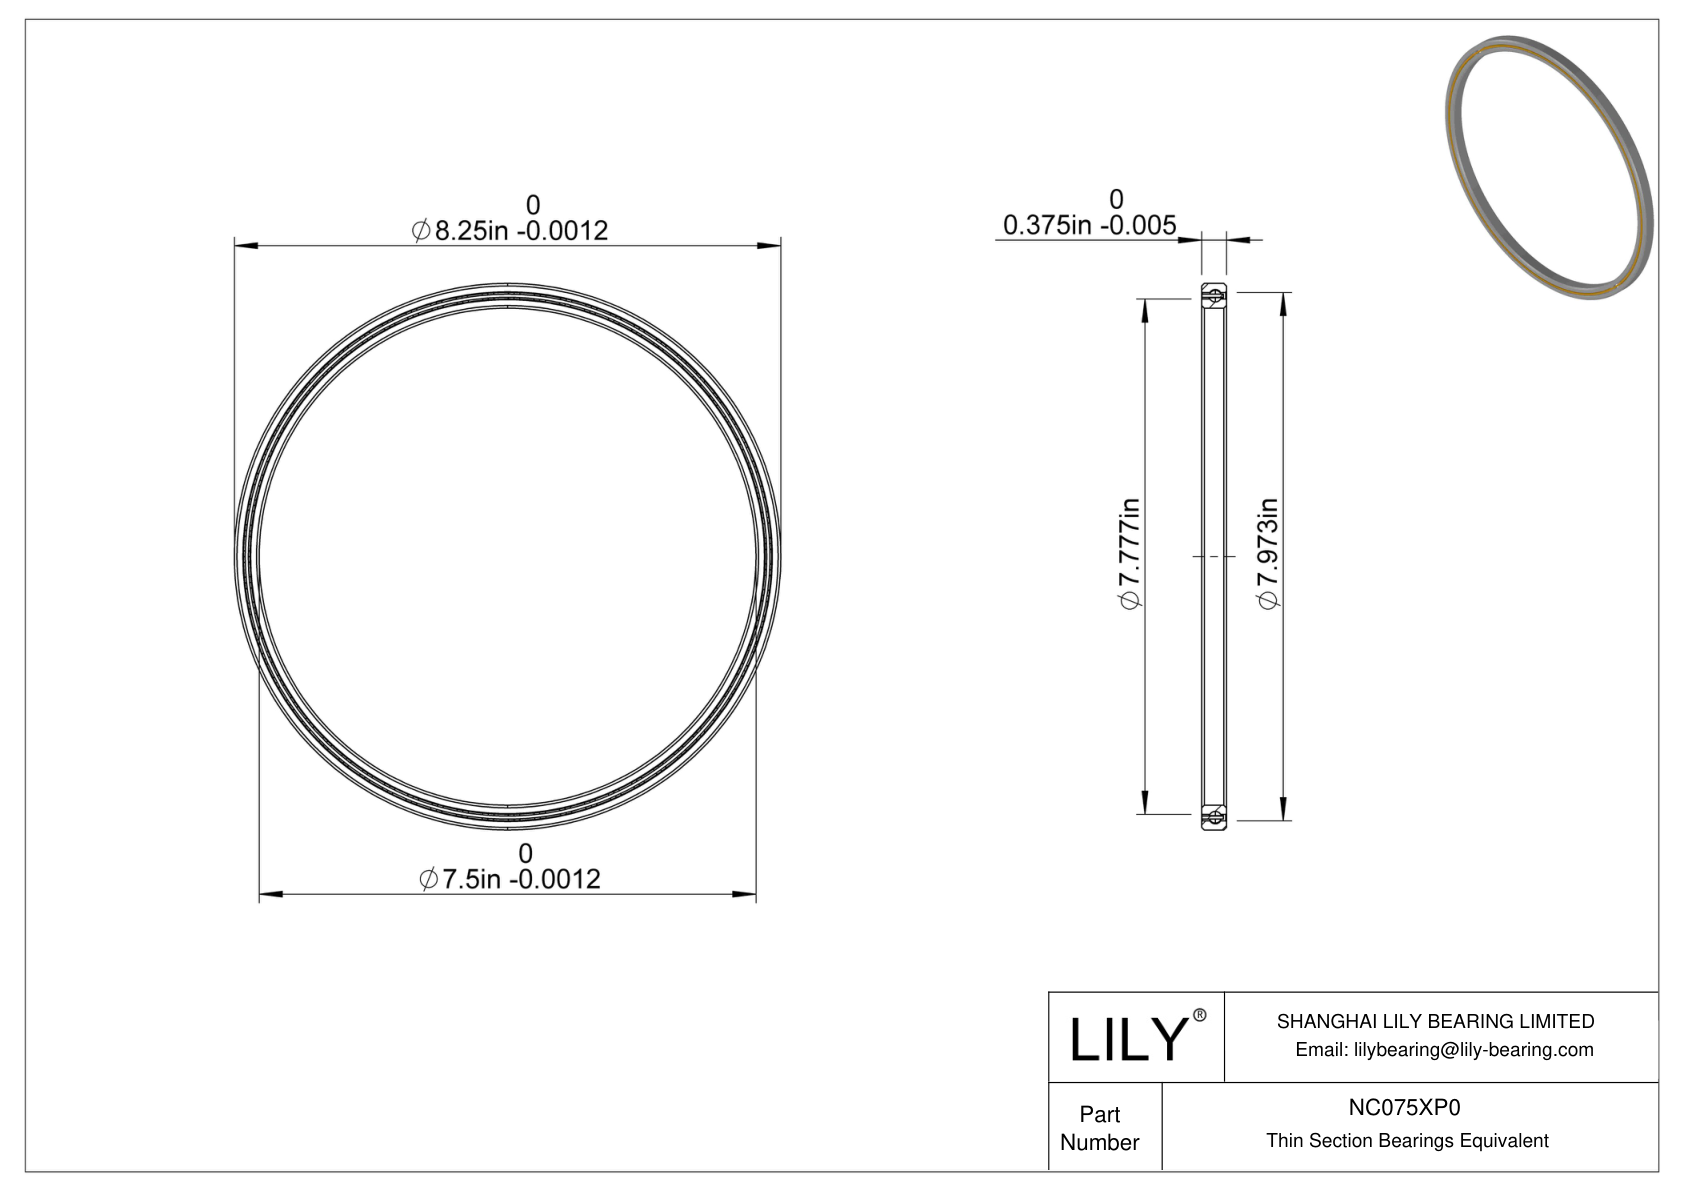 NC075XP0 Constant Section (CS) Bearings cad drawing